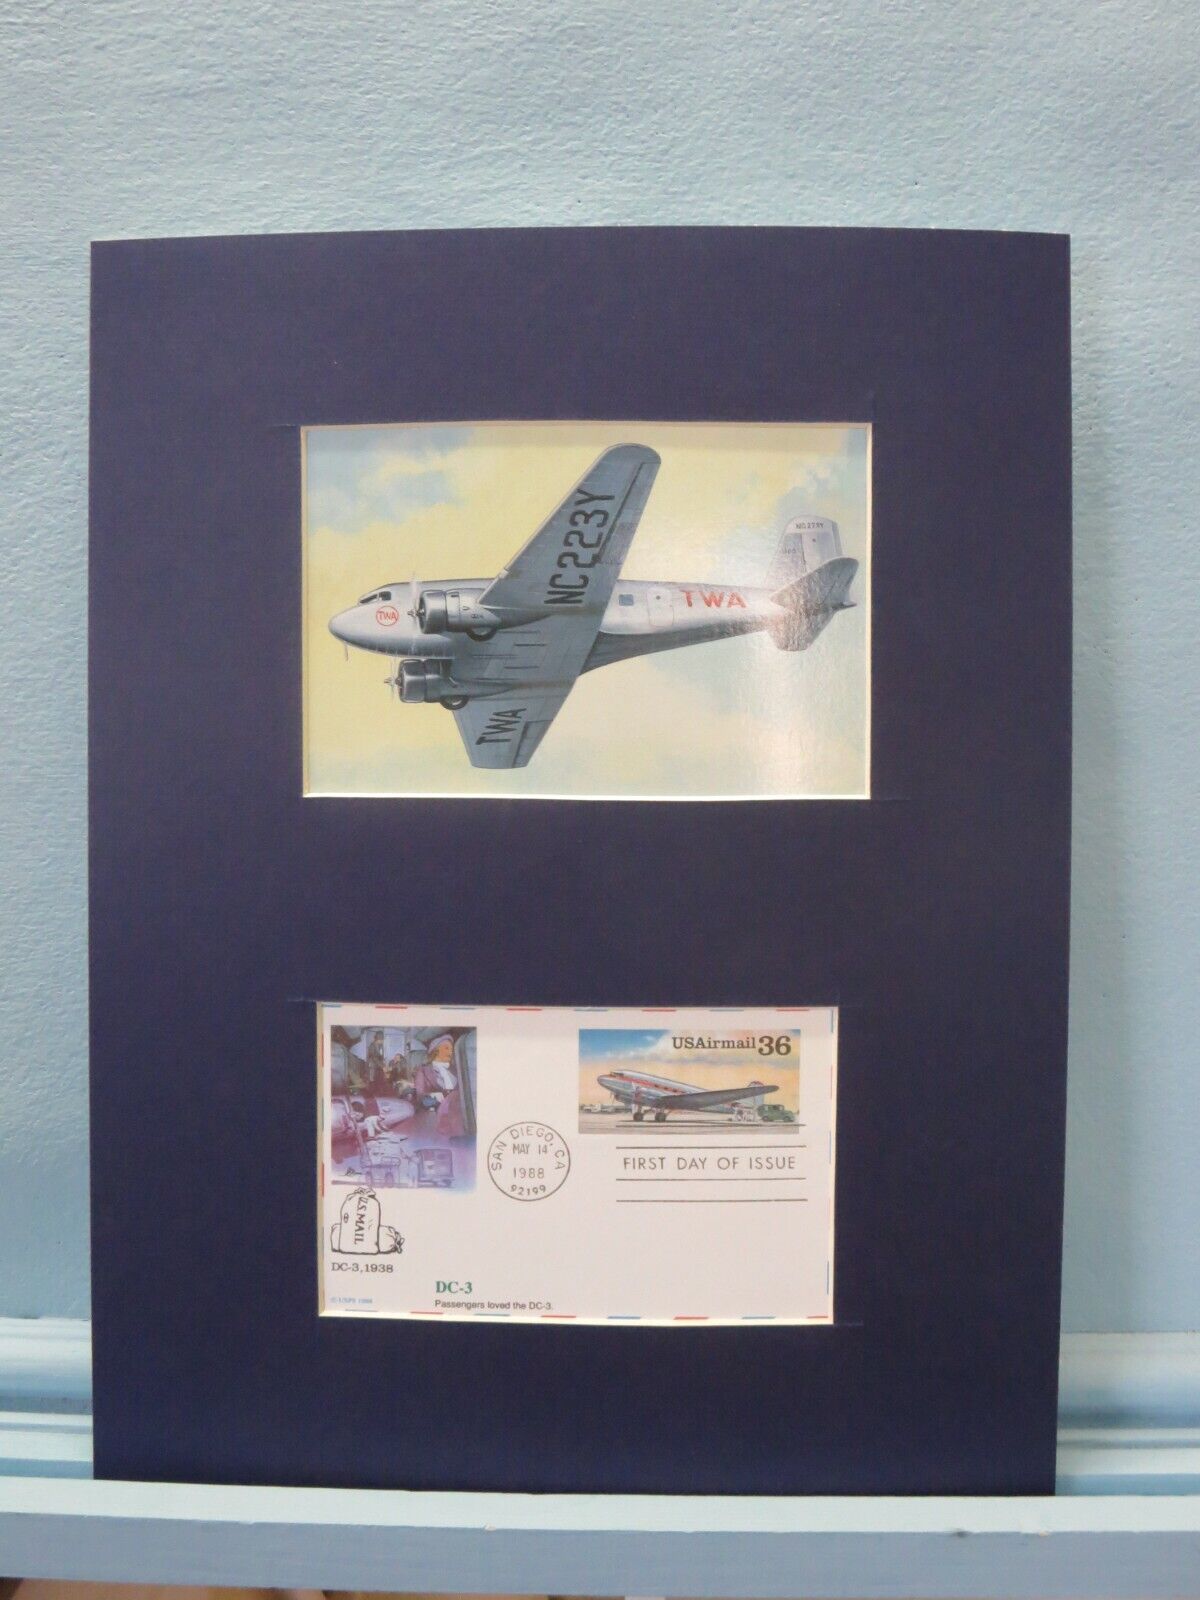 Honoring the Douglas DC-3 & the First Day Cover of its own stamp